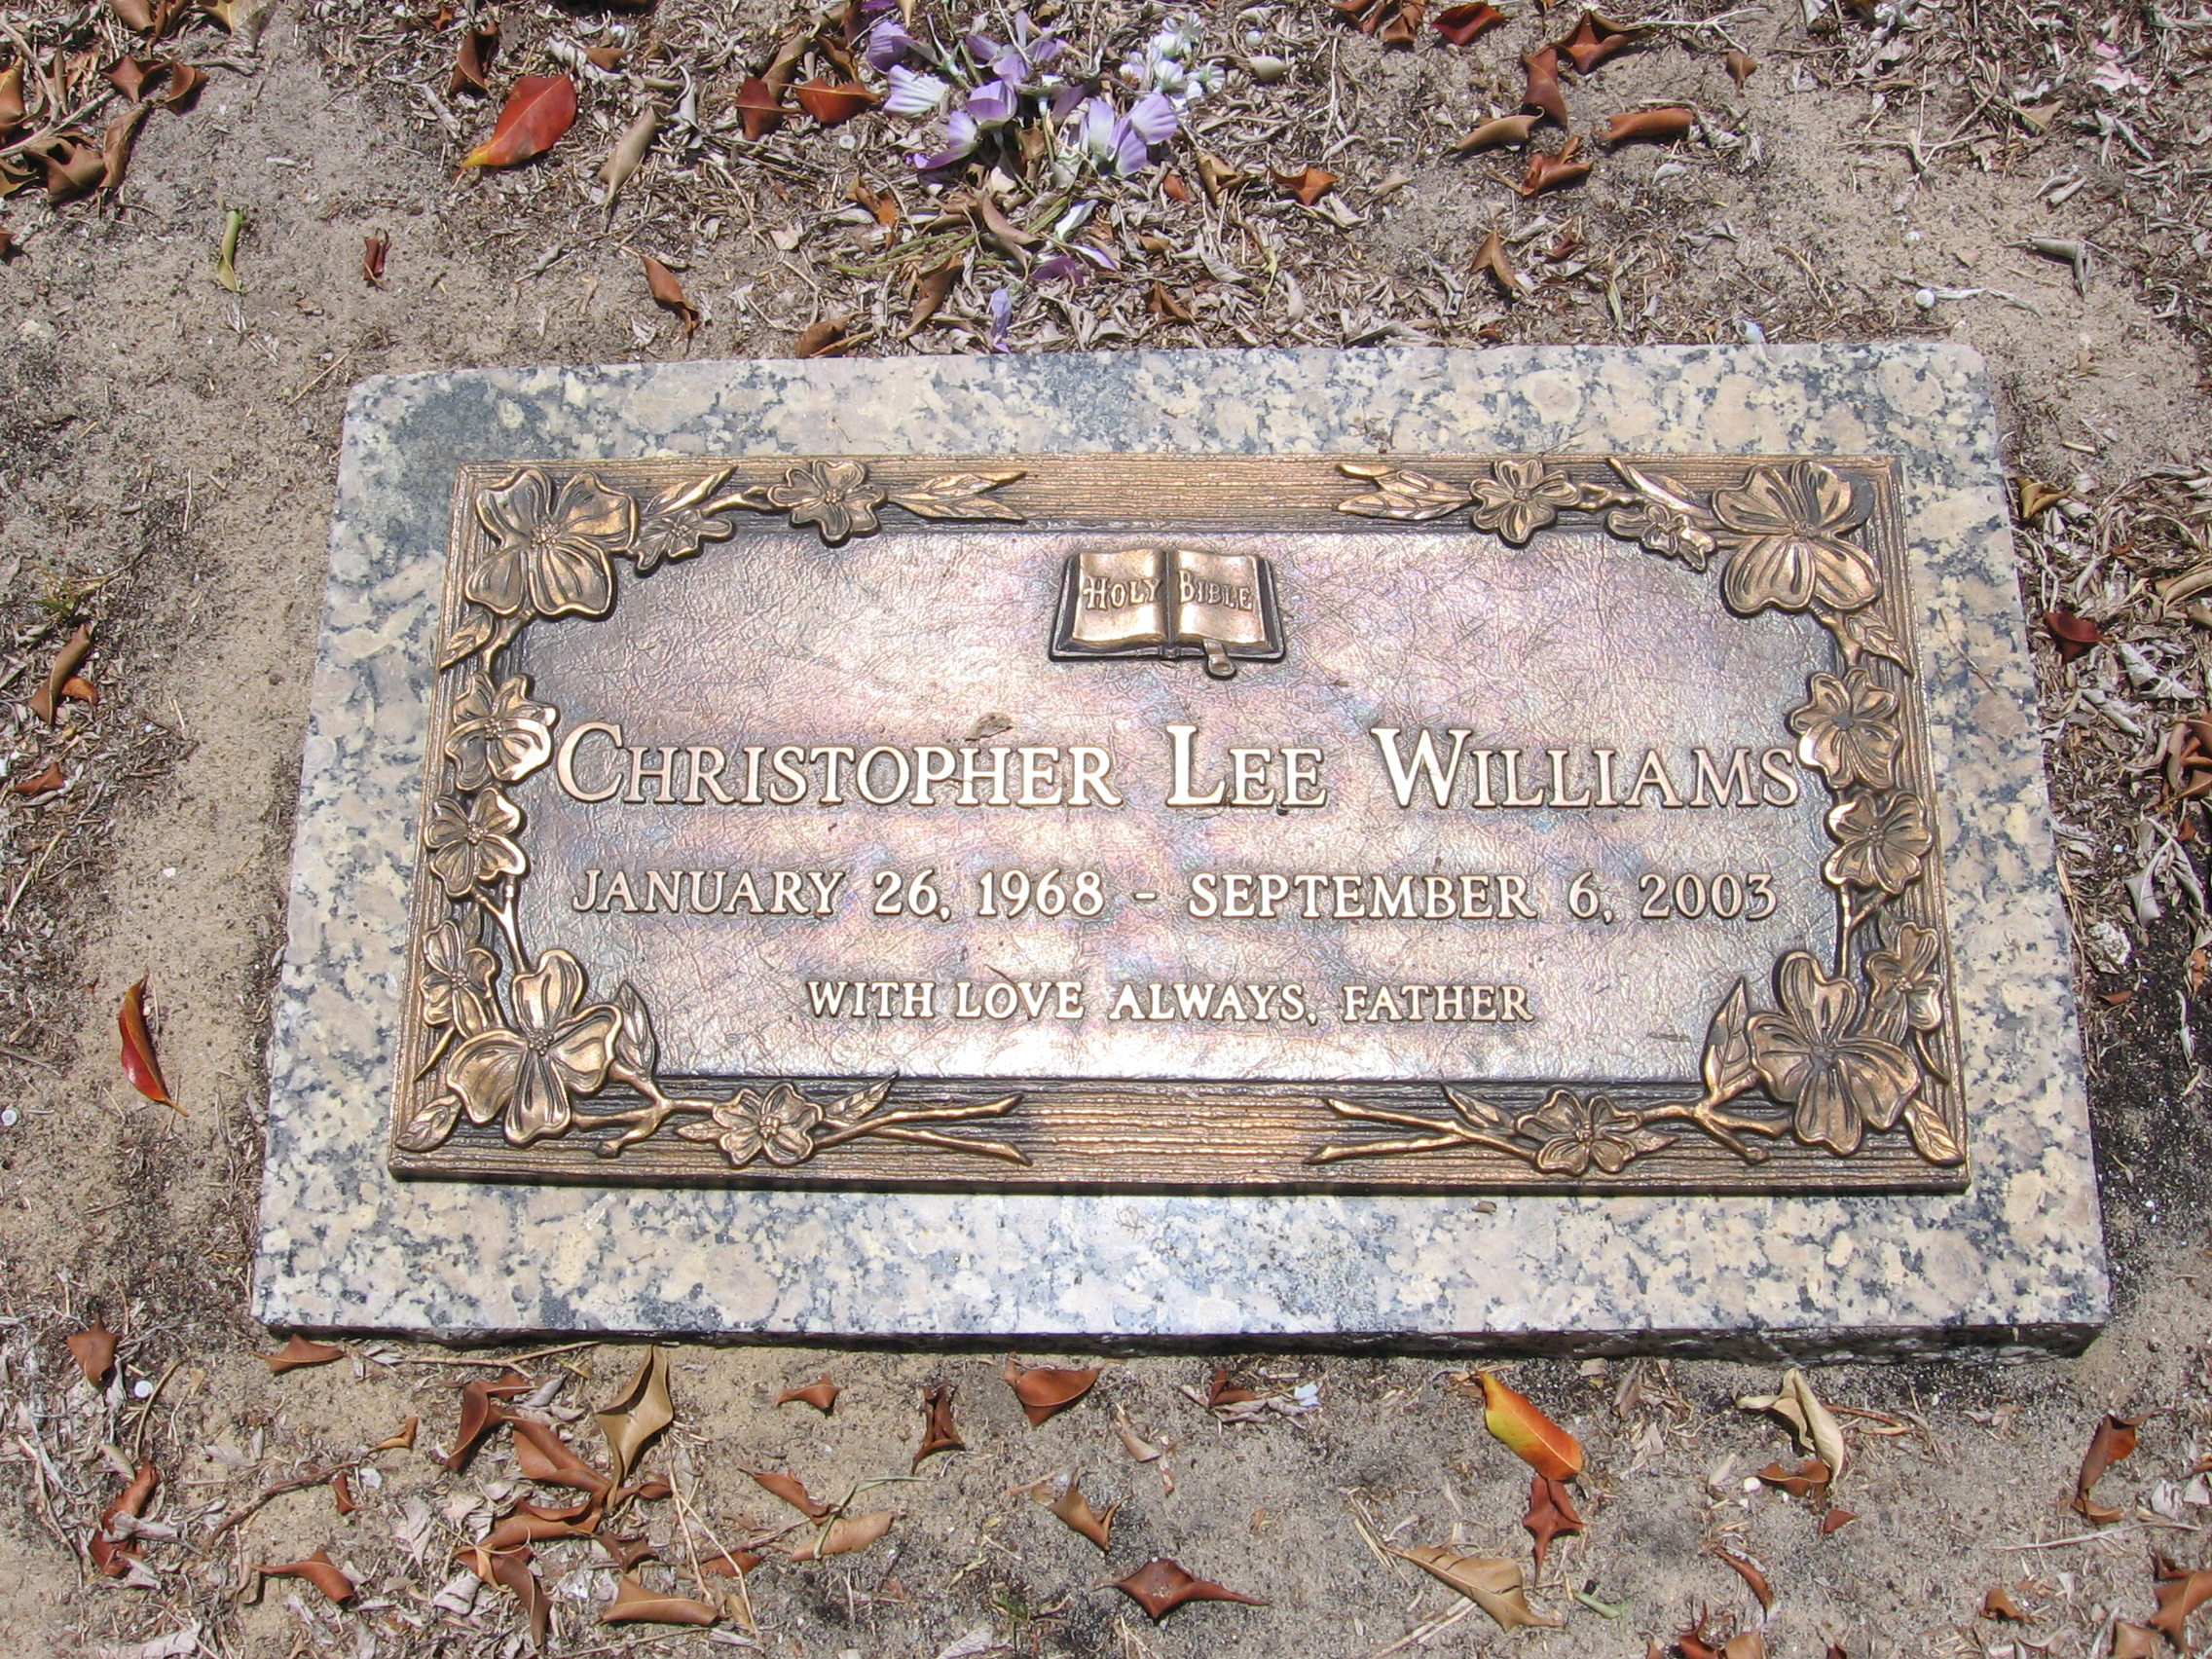 Christopher Lee Williams